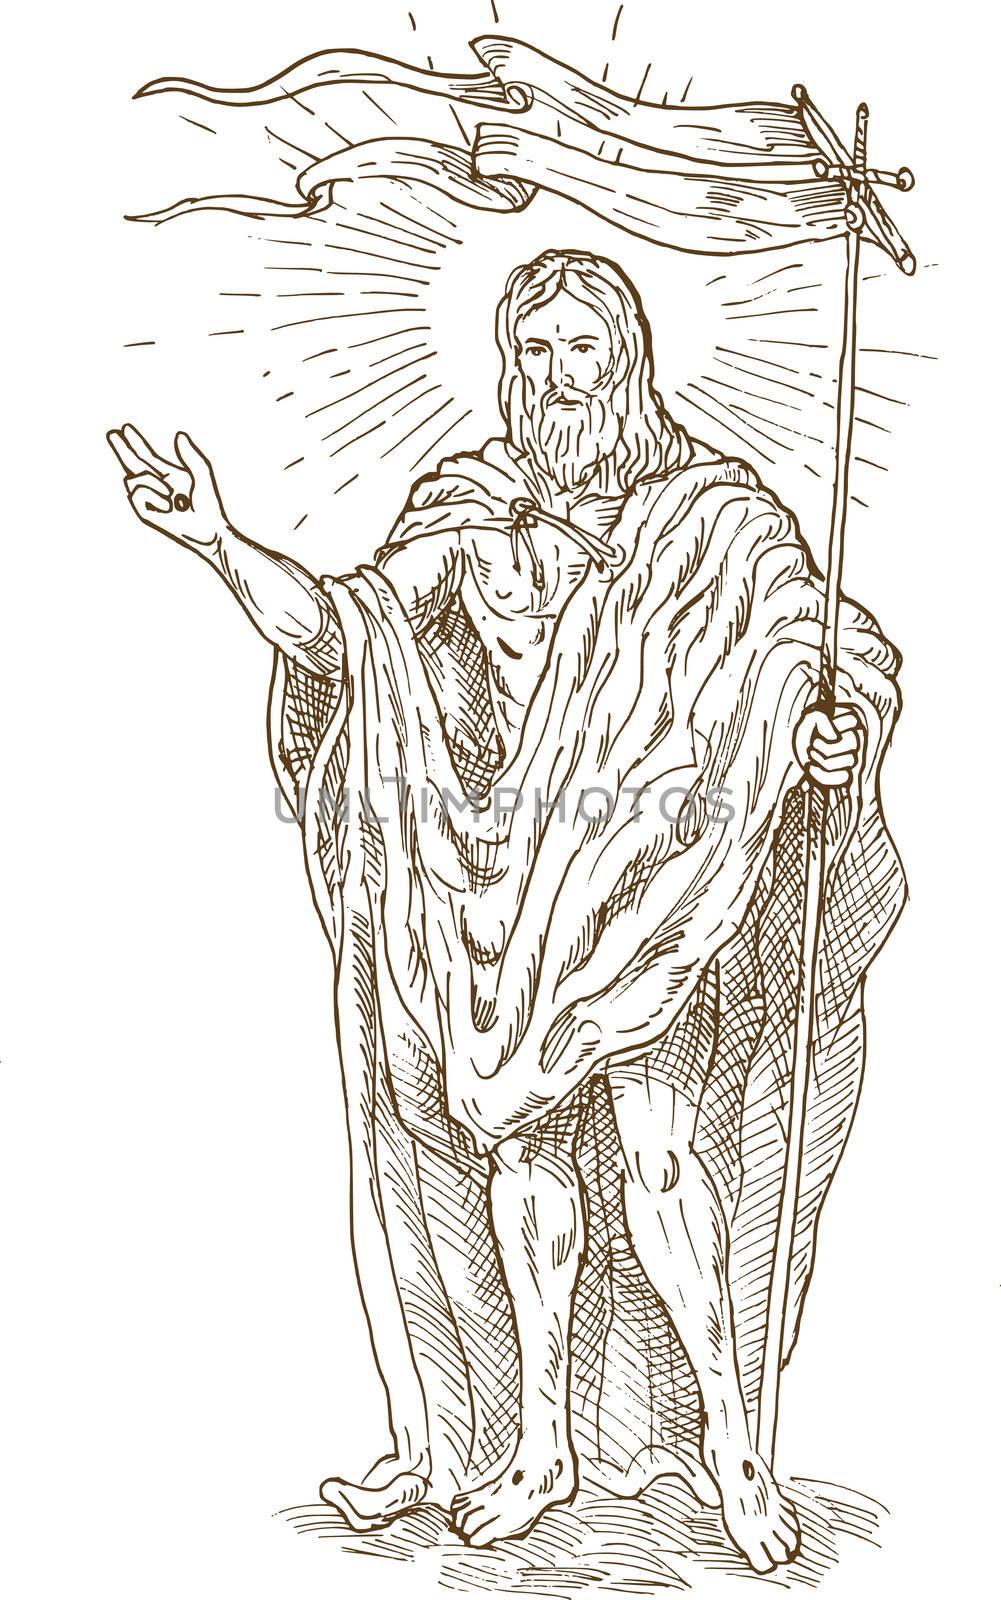 hand sketch drawing illustration of the The Risen or  Resurrected Jesus Christ standing with flag